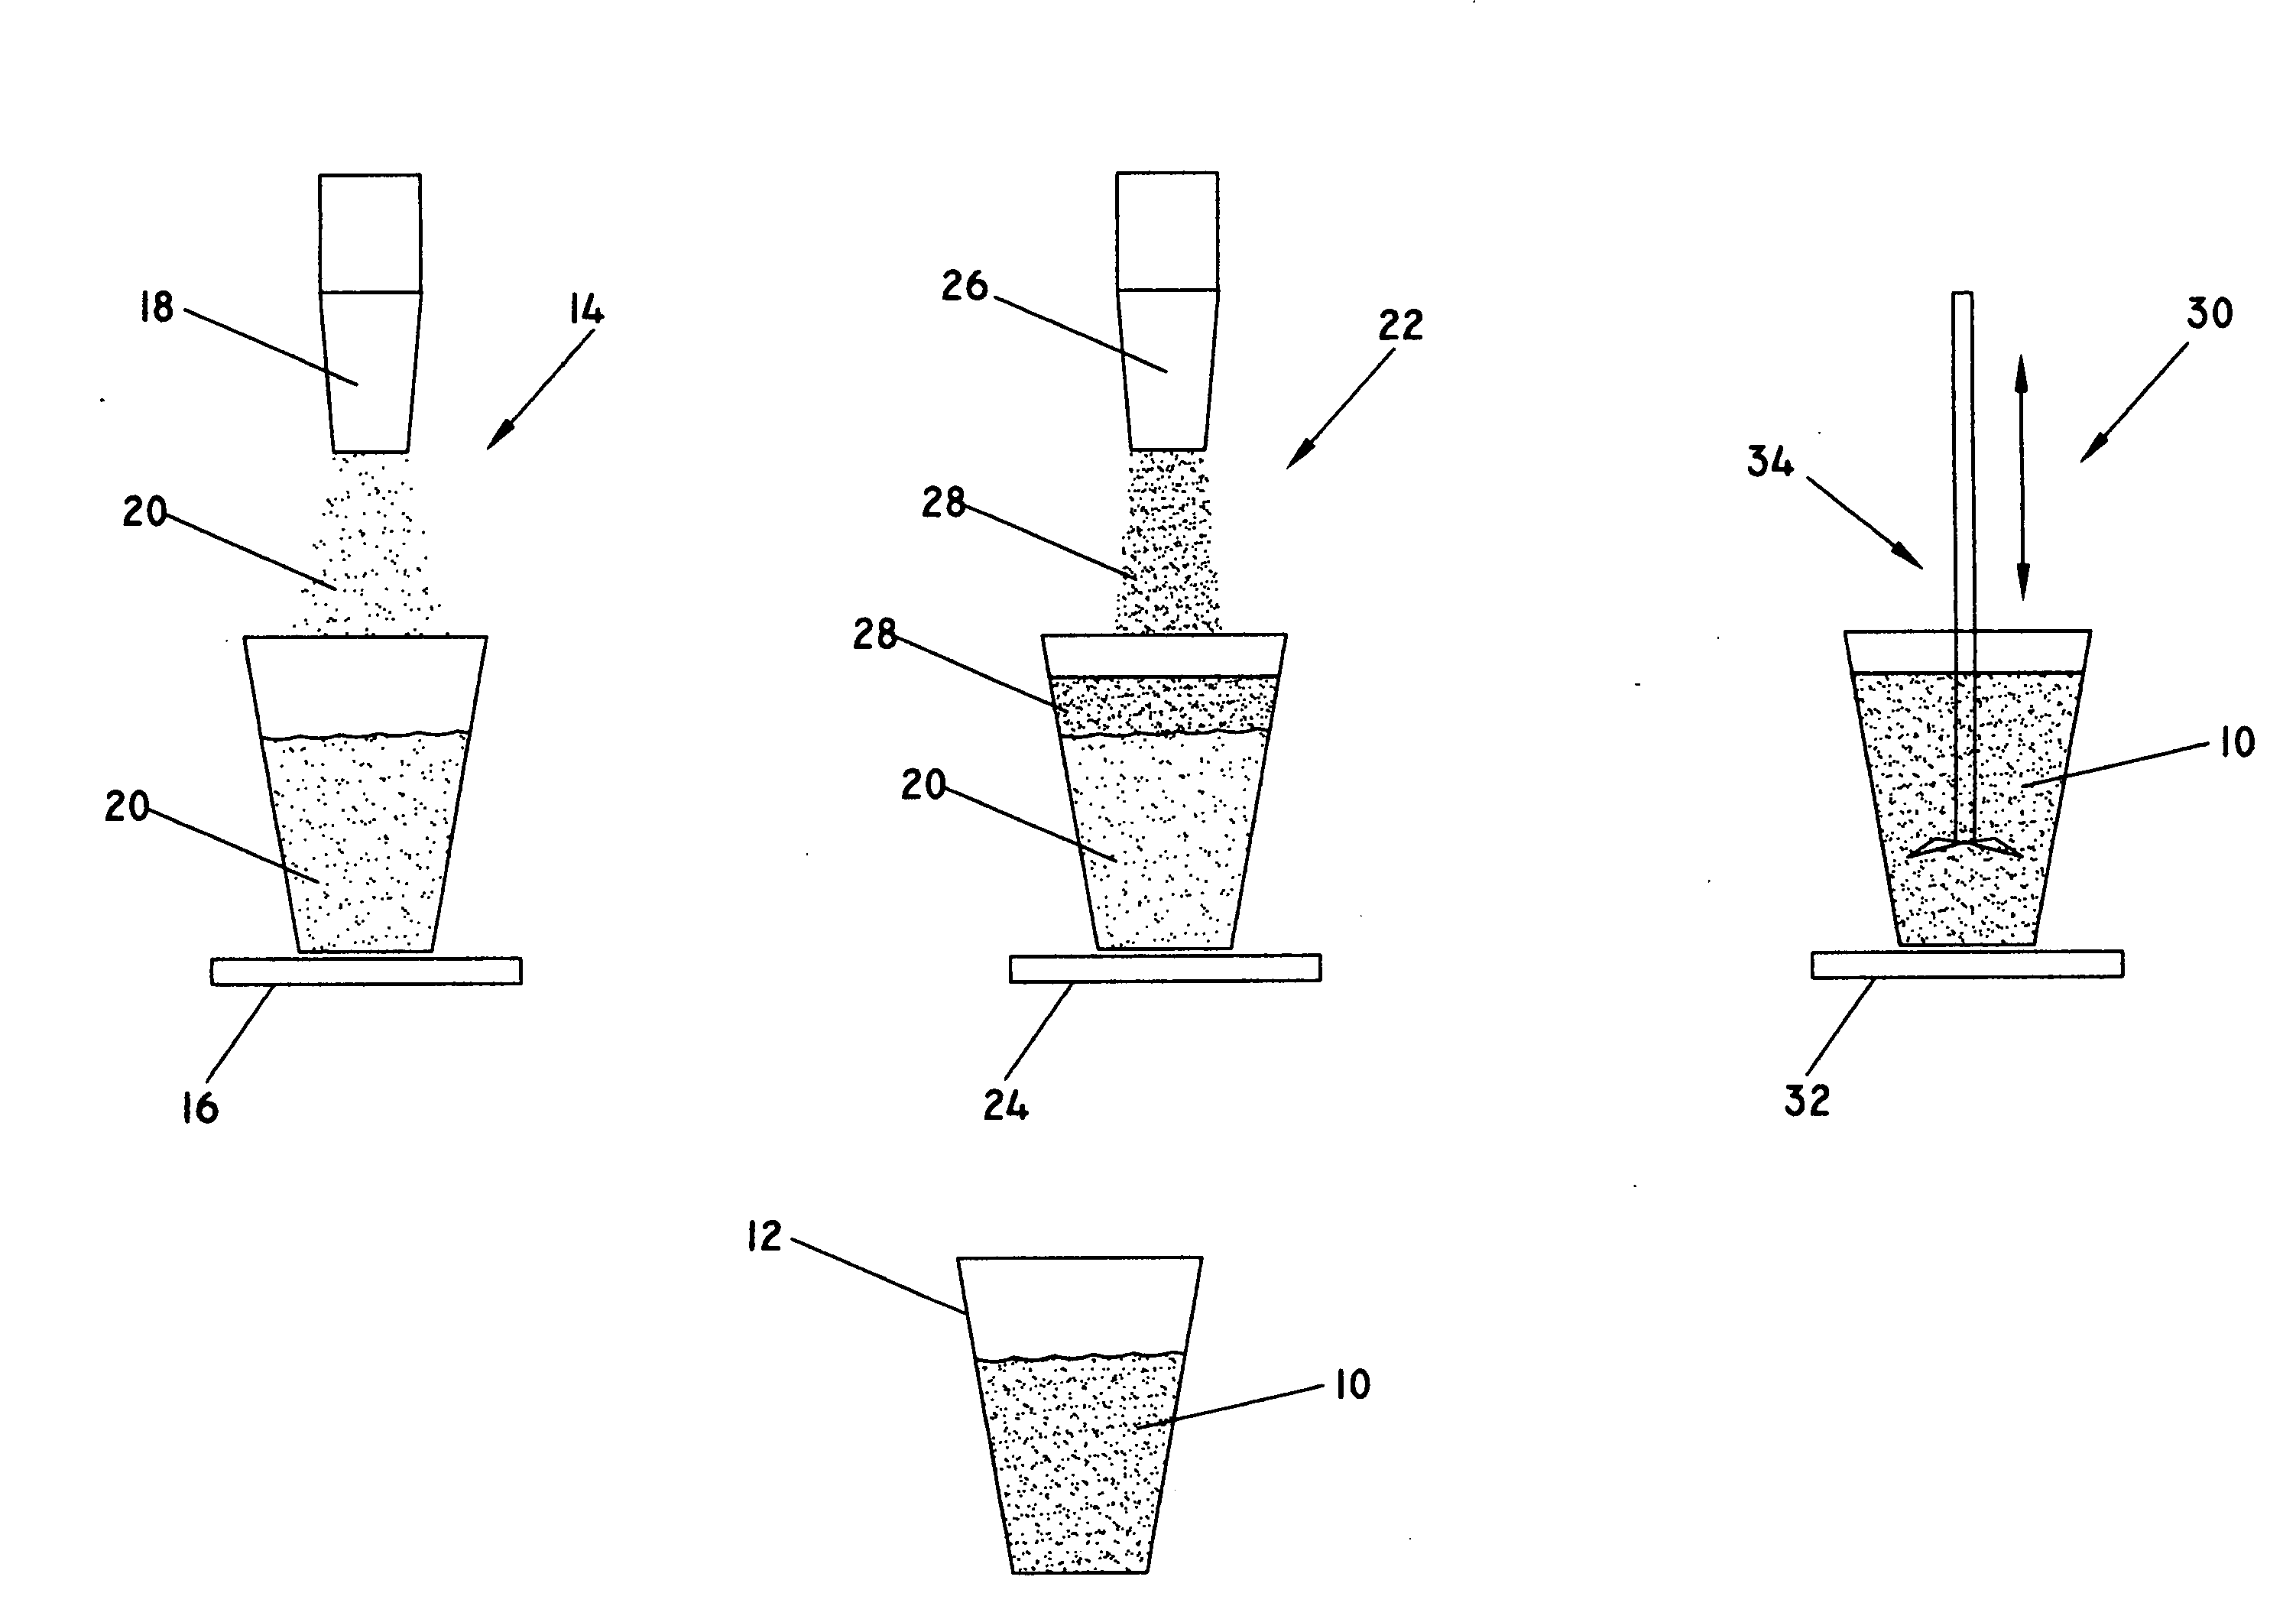 Method for blending a beverage in a single serving cup